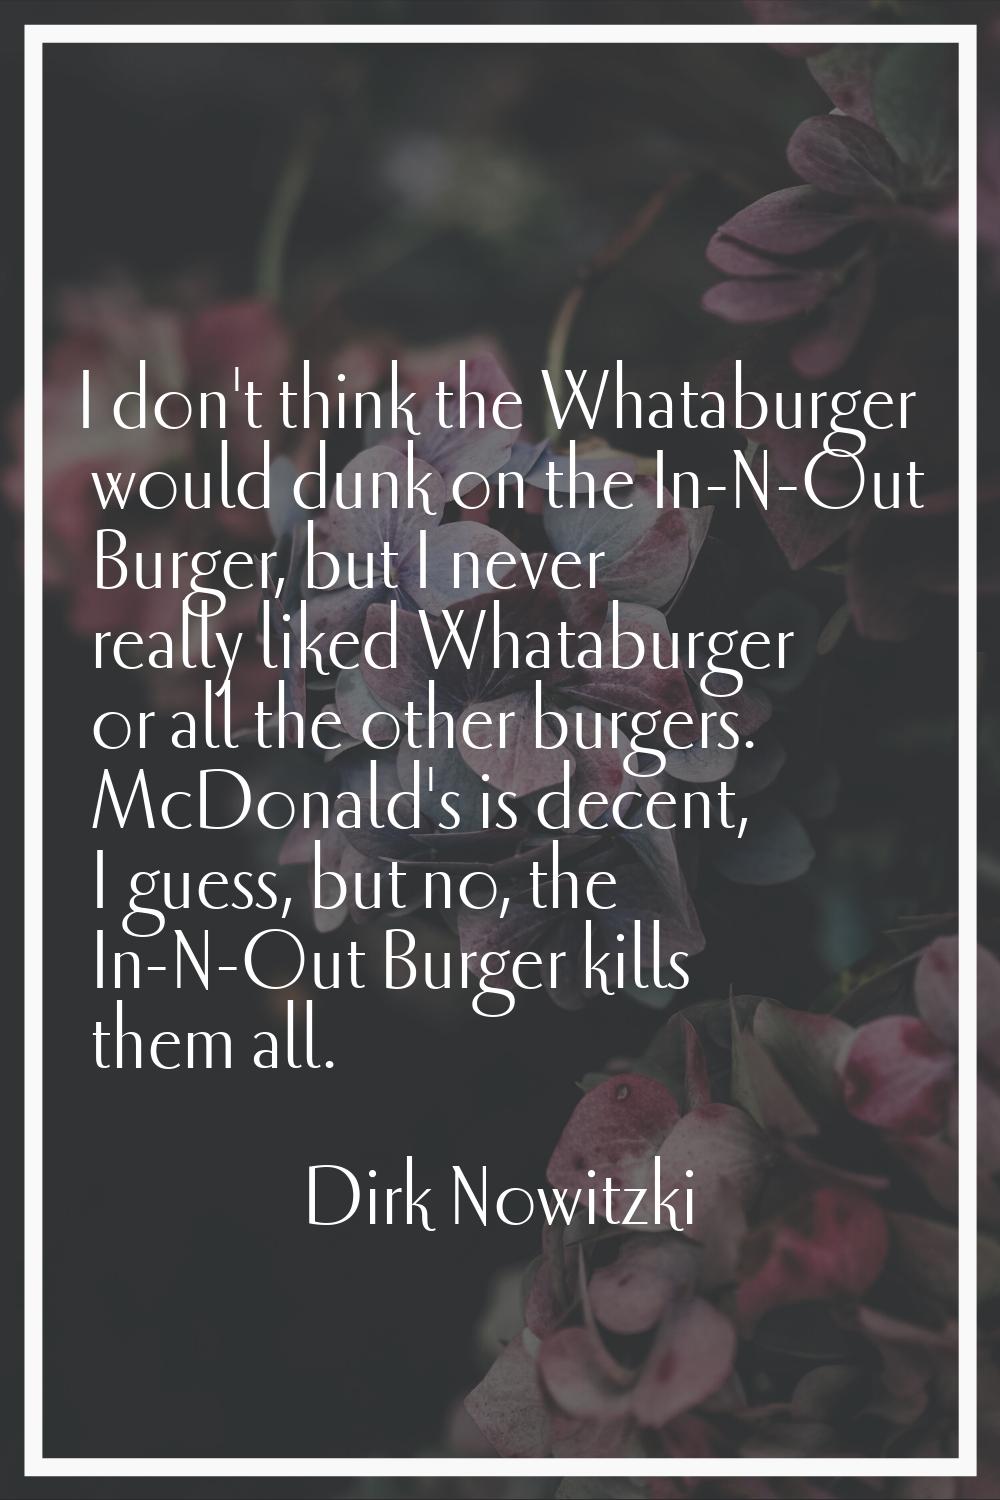 I don't think the Whataburger would dunk on the In-N-Out Burger, but I never really liked Whataburg